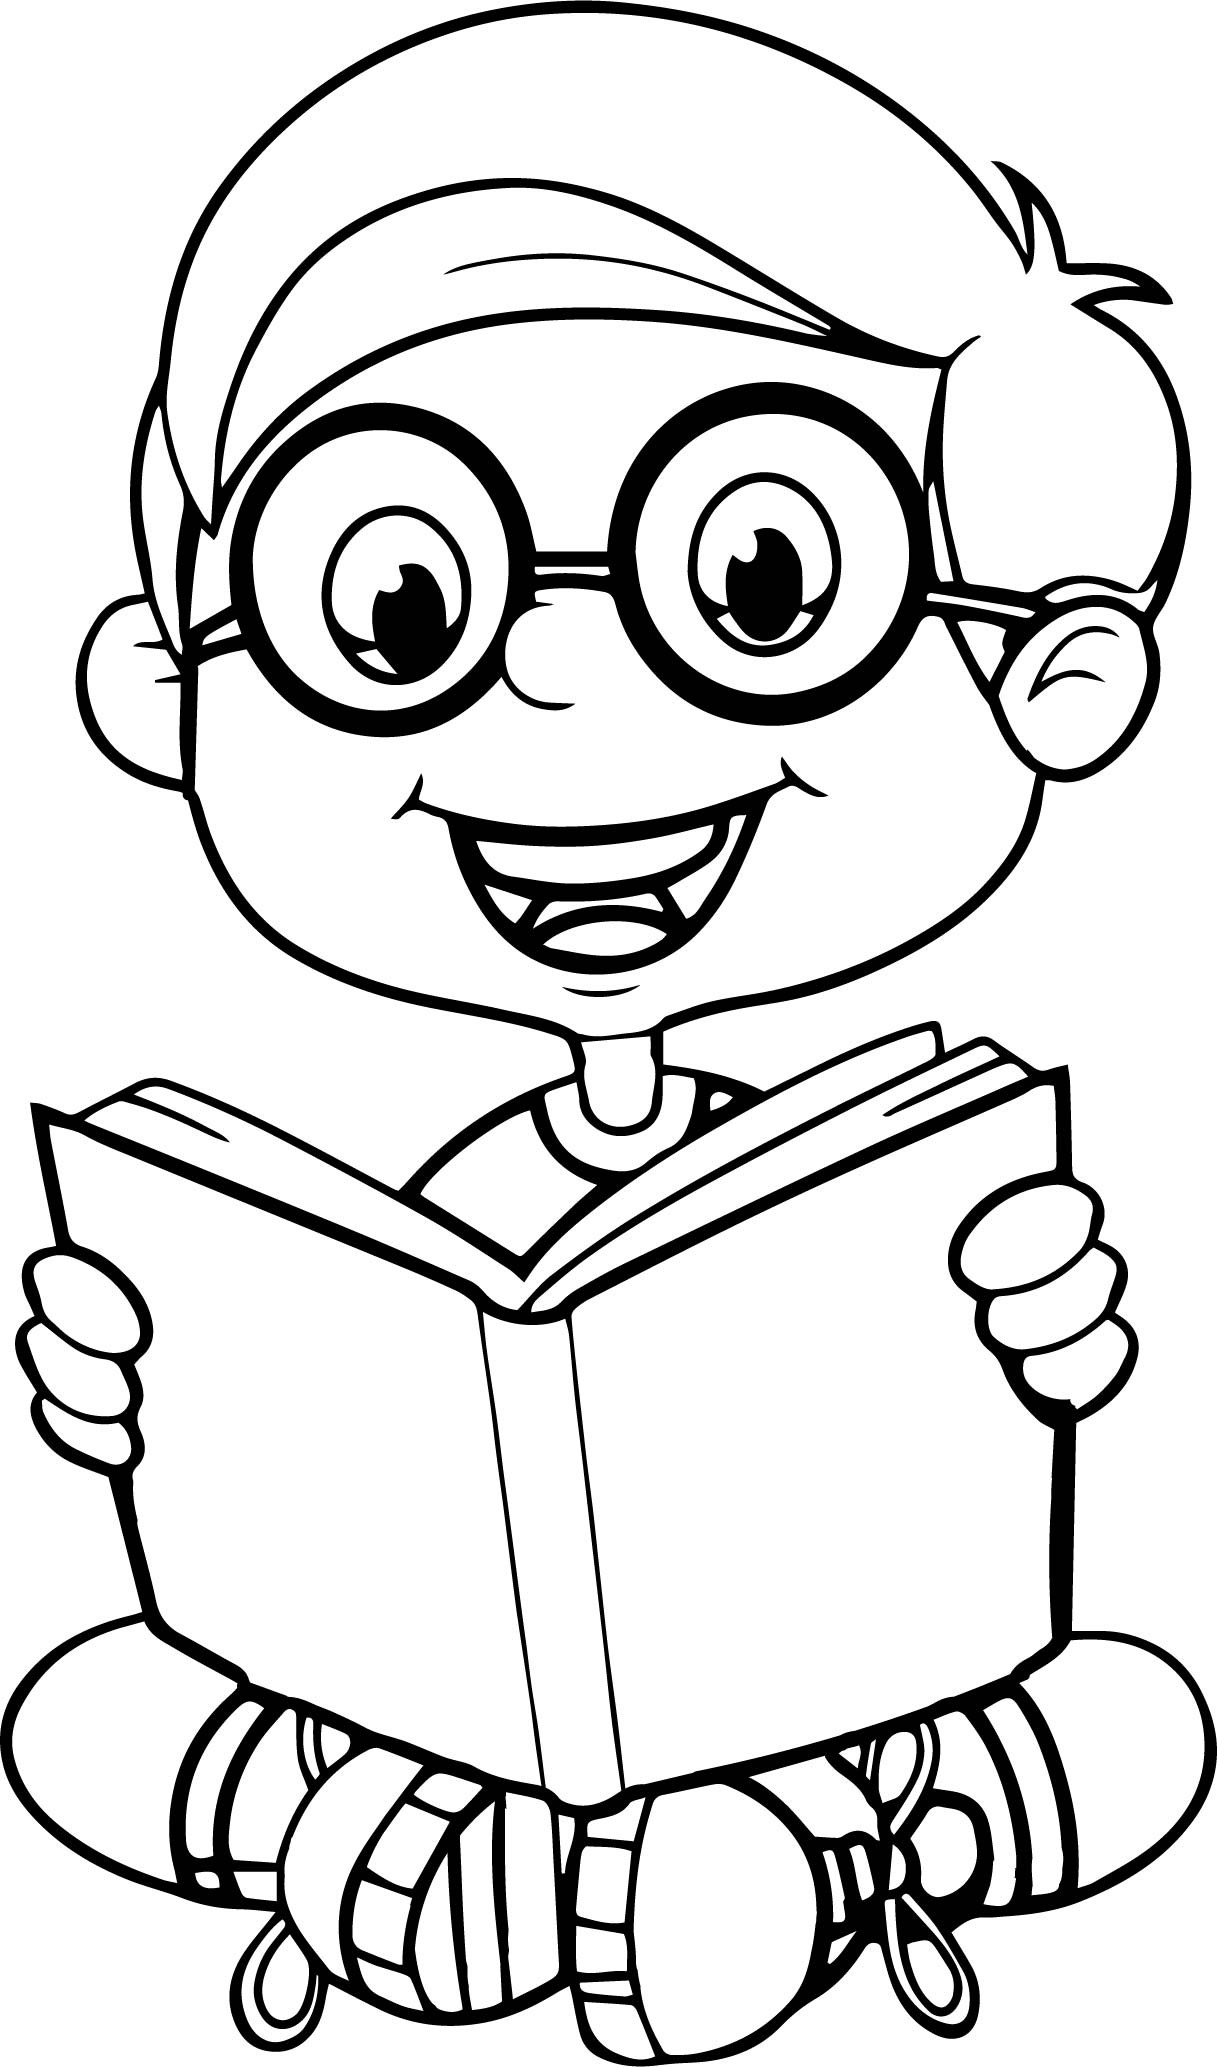 Kids Reading Coloring Pages
 Reading A Book Cute Cartoon Kid Coloring Page